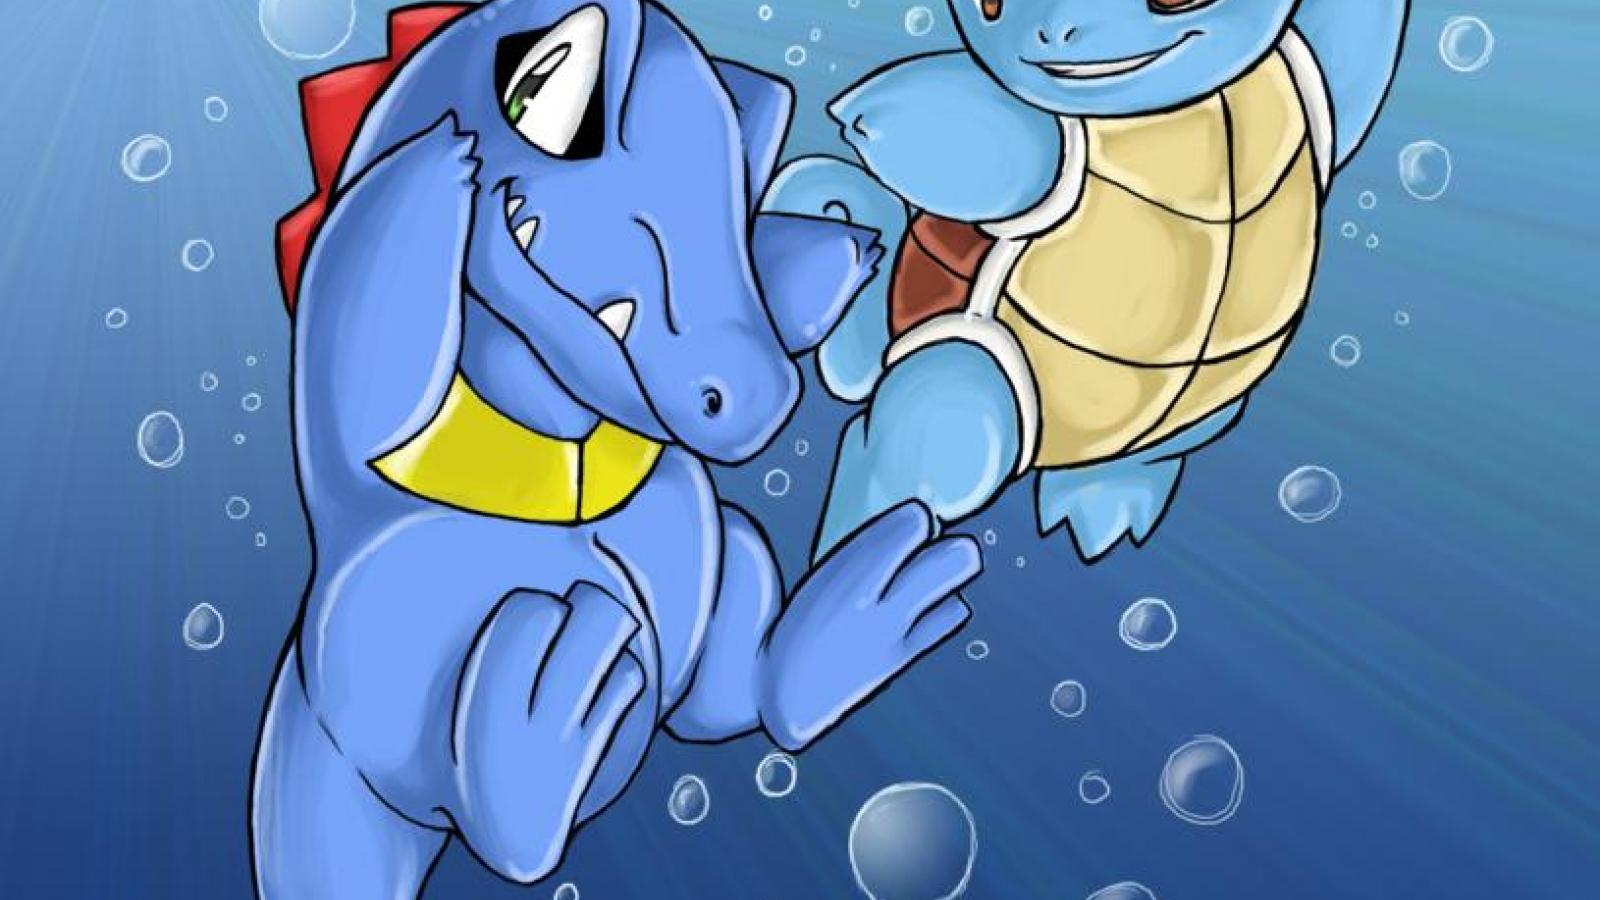 Download Squirtle Wallpapers For Android, Squirtle - Pokemon Totodile , HD Wallpaper & Backgrounds